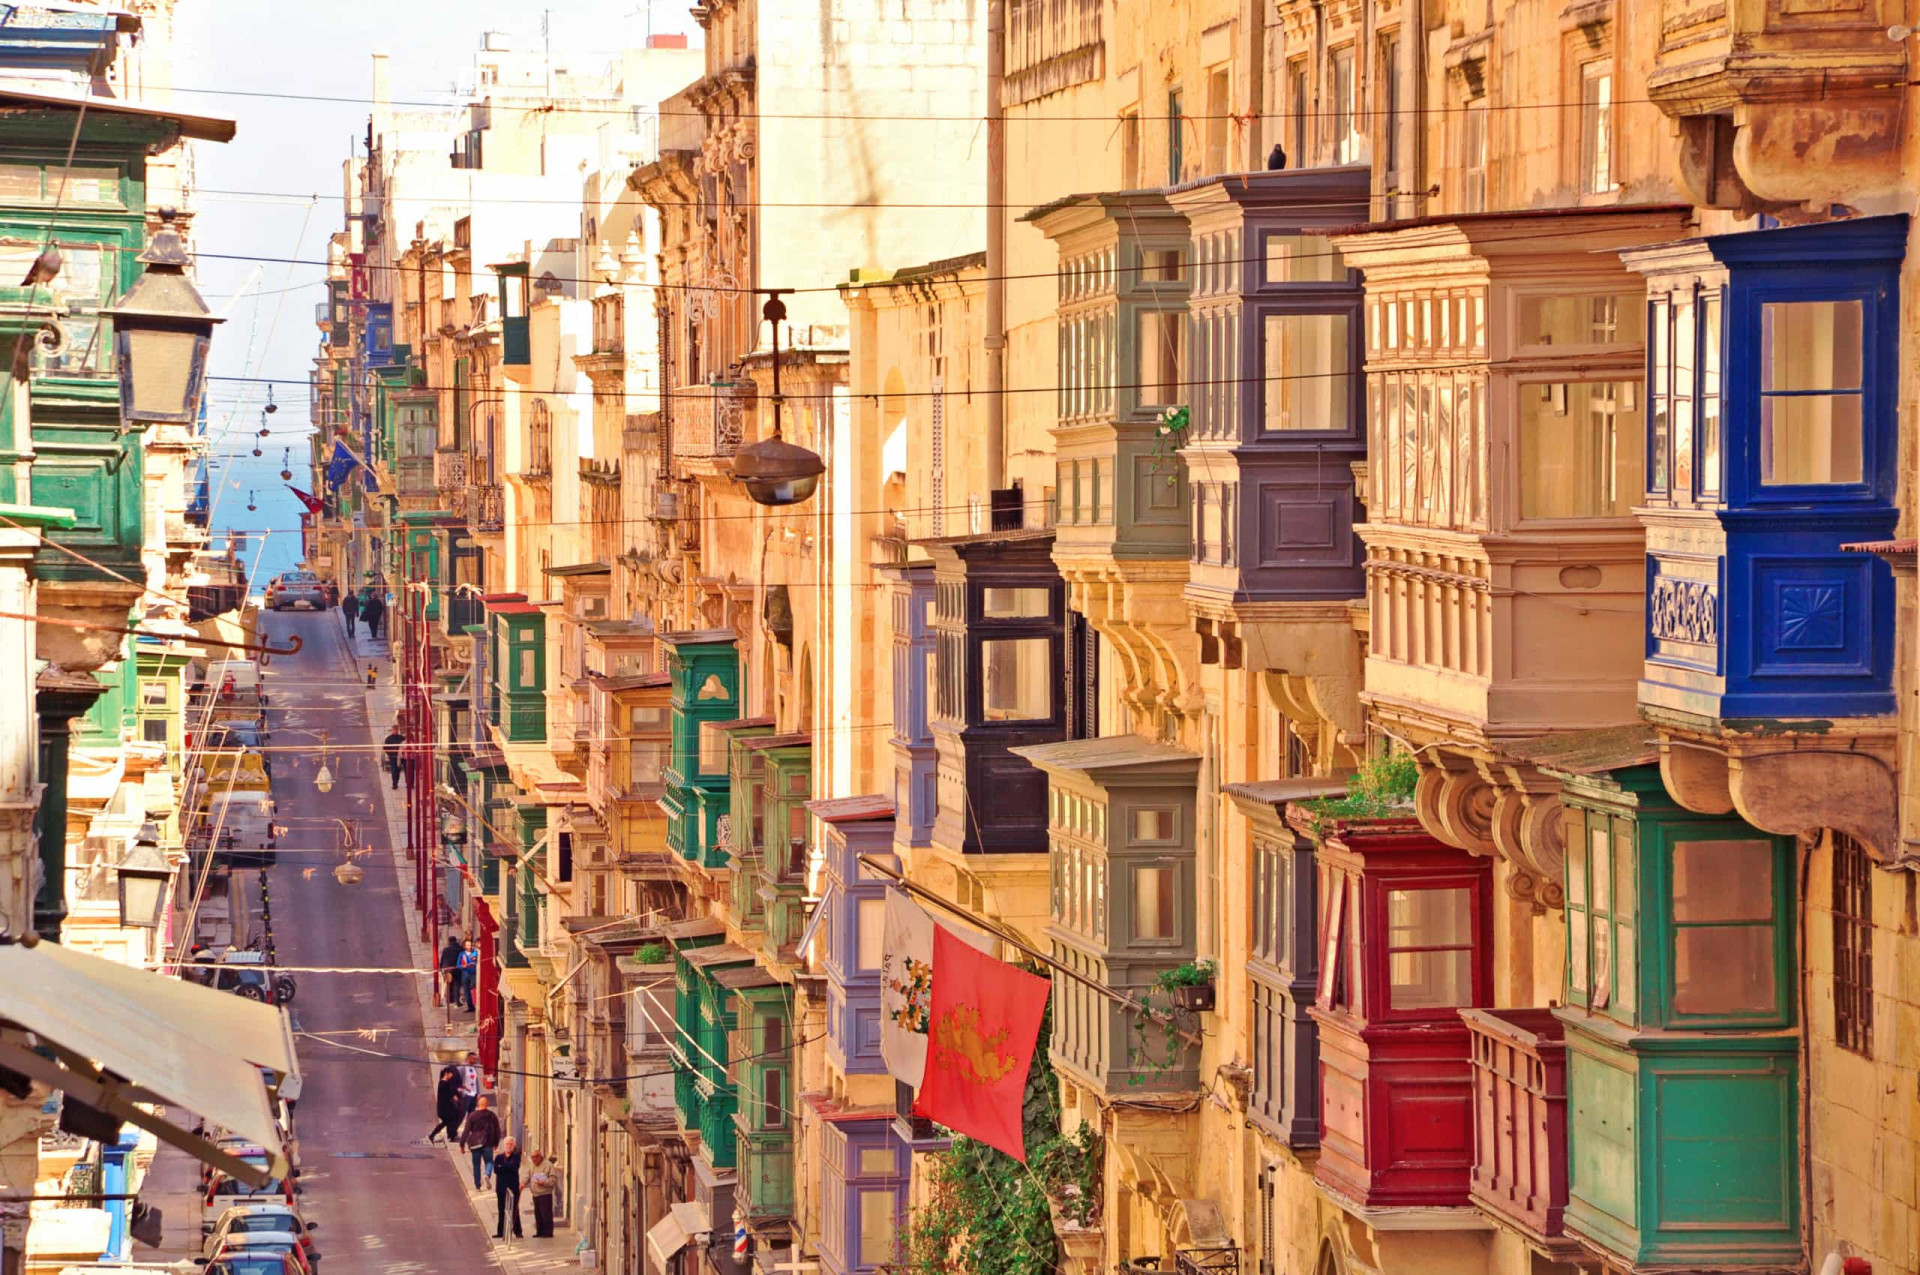 The weather in Malta is bright most of the year, with an average of 300 days of sun, and very mild winters. Valletta gets nearly 3,000 hours of sunshine every year, so it's a great place to travel even when it’s not high season.<p><a href="https://www.msn.com/en-us/community/channel/vid-7xx8mnucu55yw63we9va2gwr7uihbxwc68fxqp25x6tg4ftibpra?cvid=94631541bc0f4f89bfd59158d696ad7e">Follow us and access great exclusive content every day</a></p>